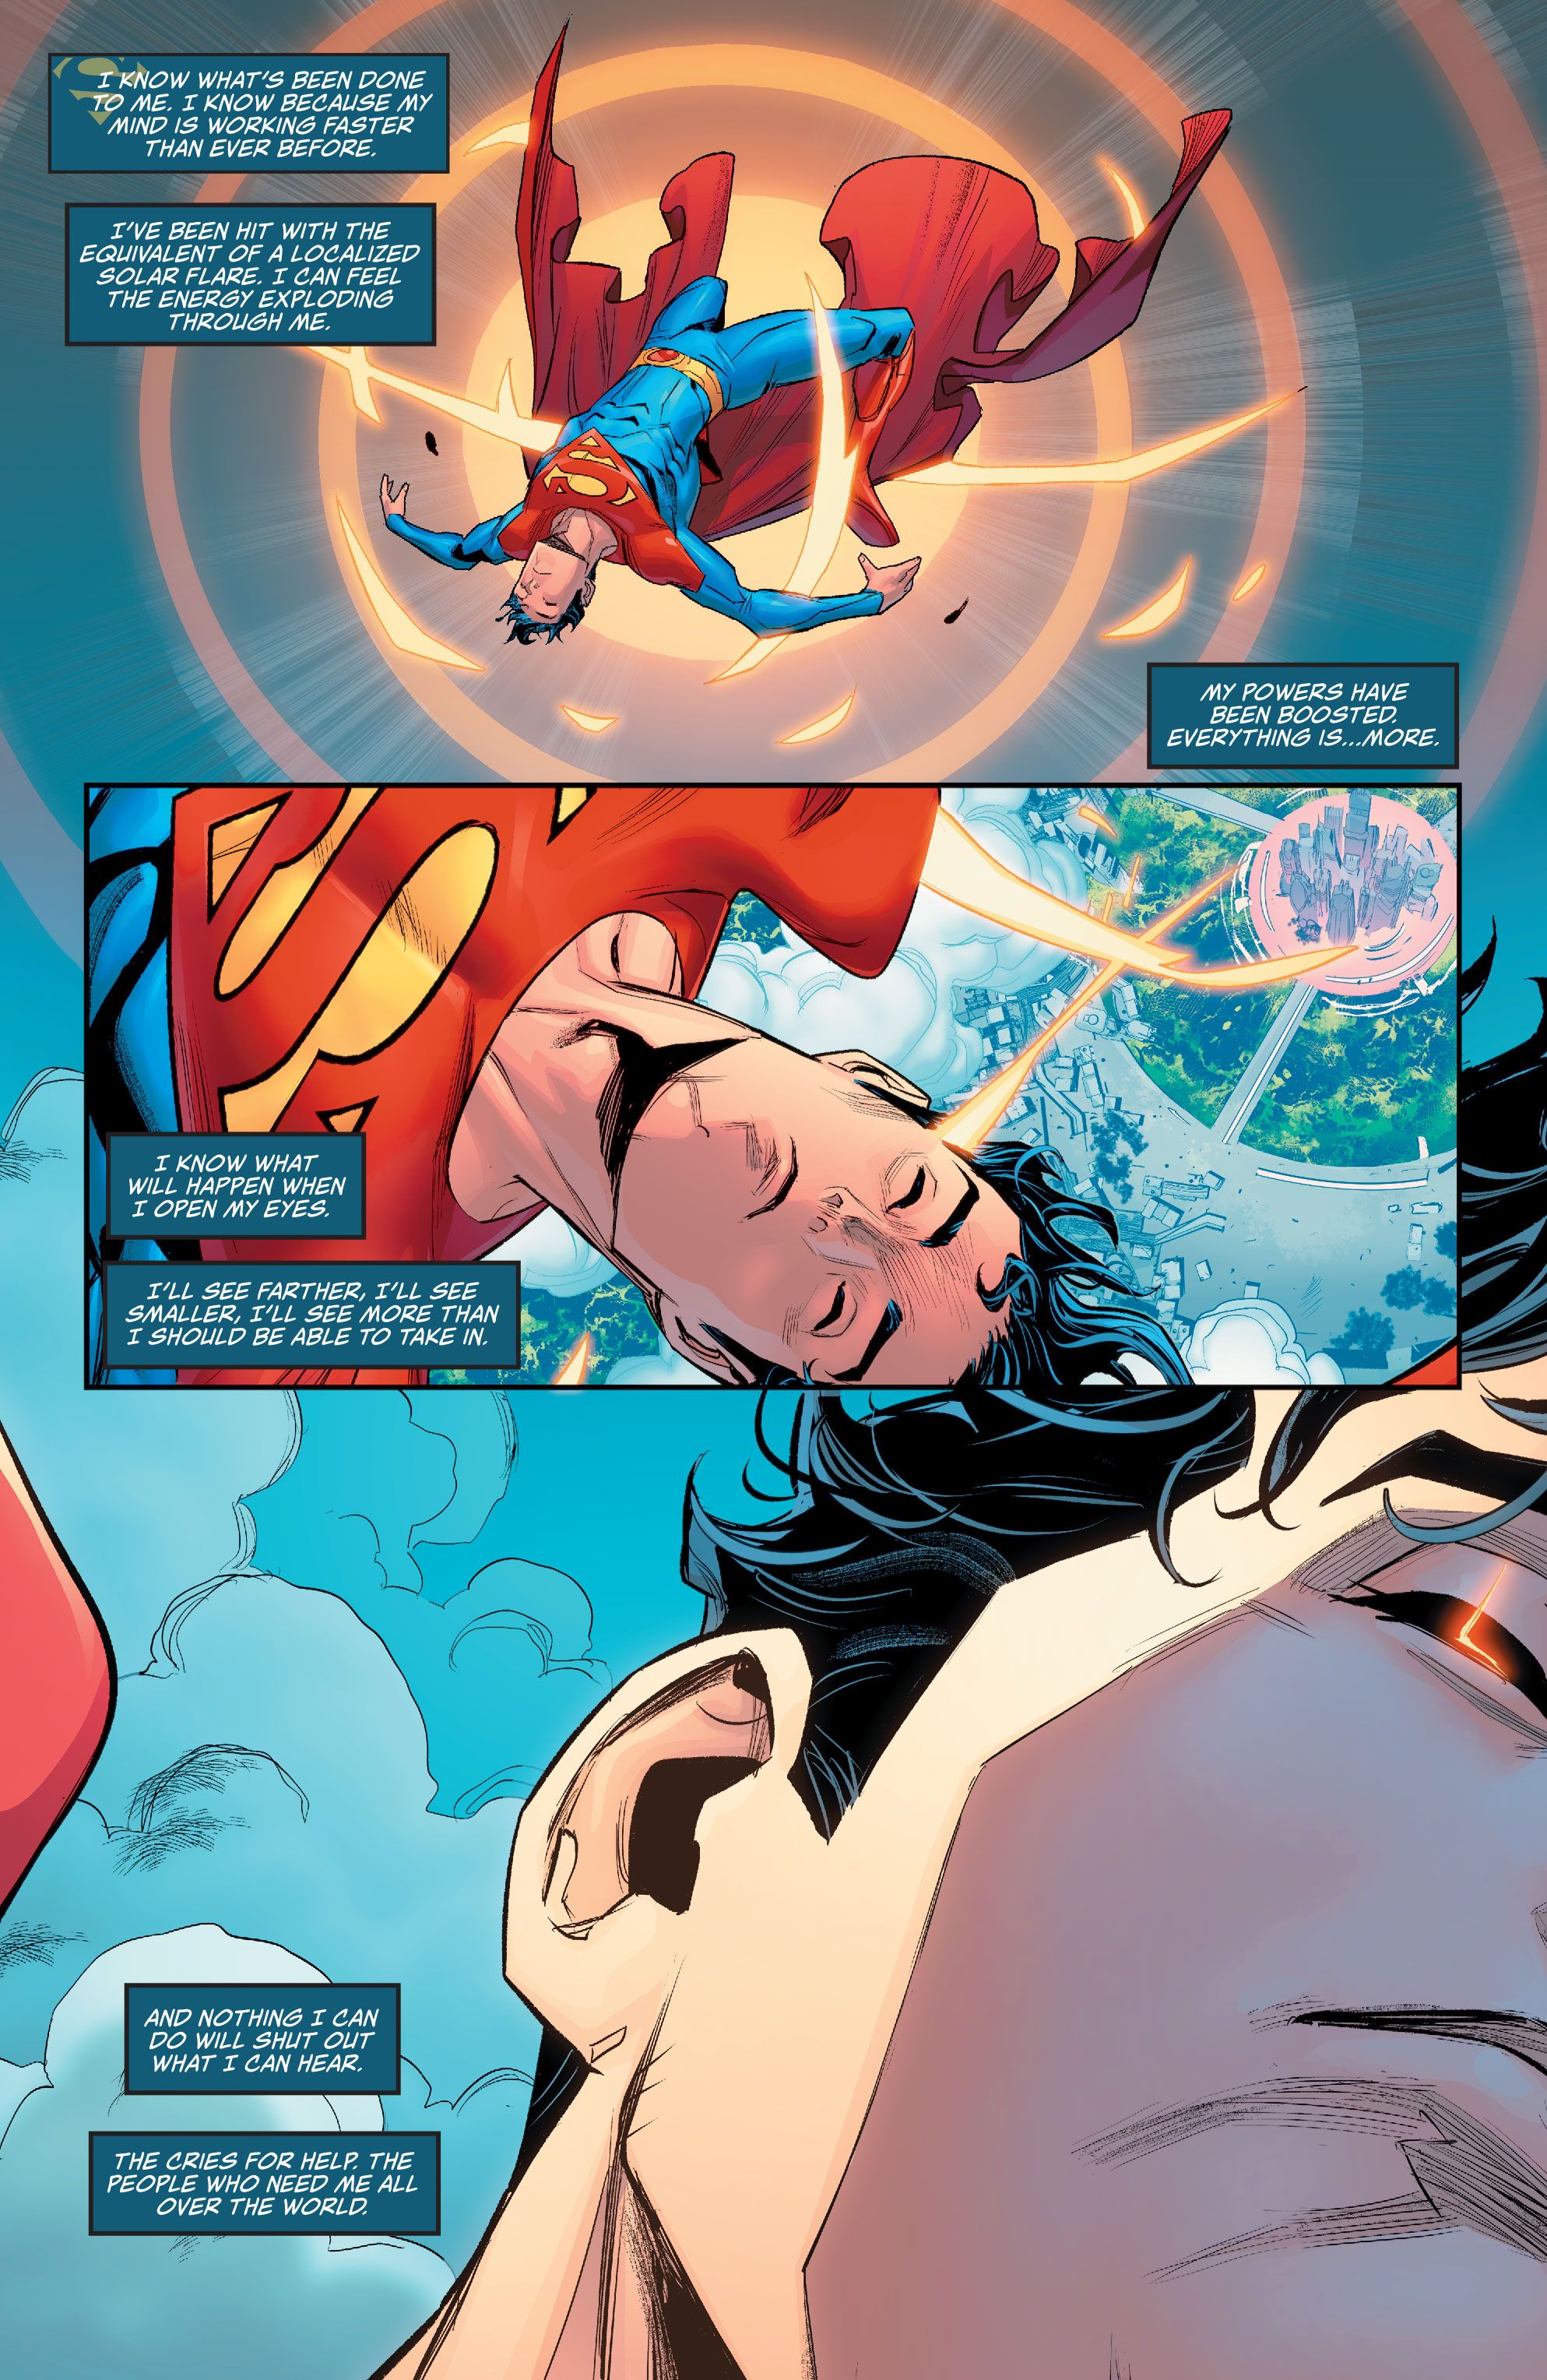 The New Superman is About To Learn KalEls Hardest Lesson